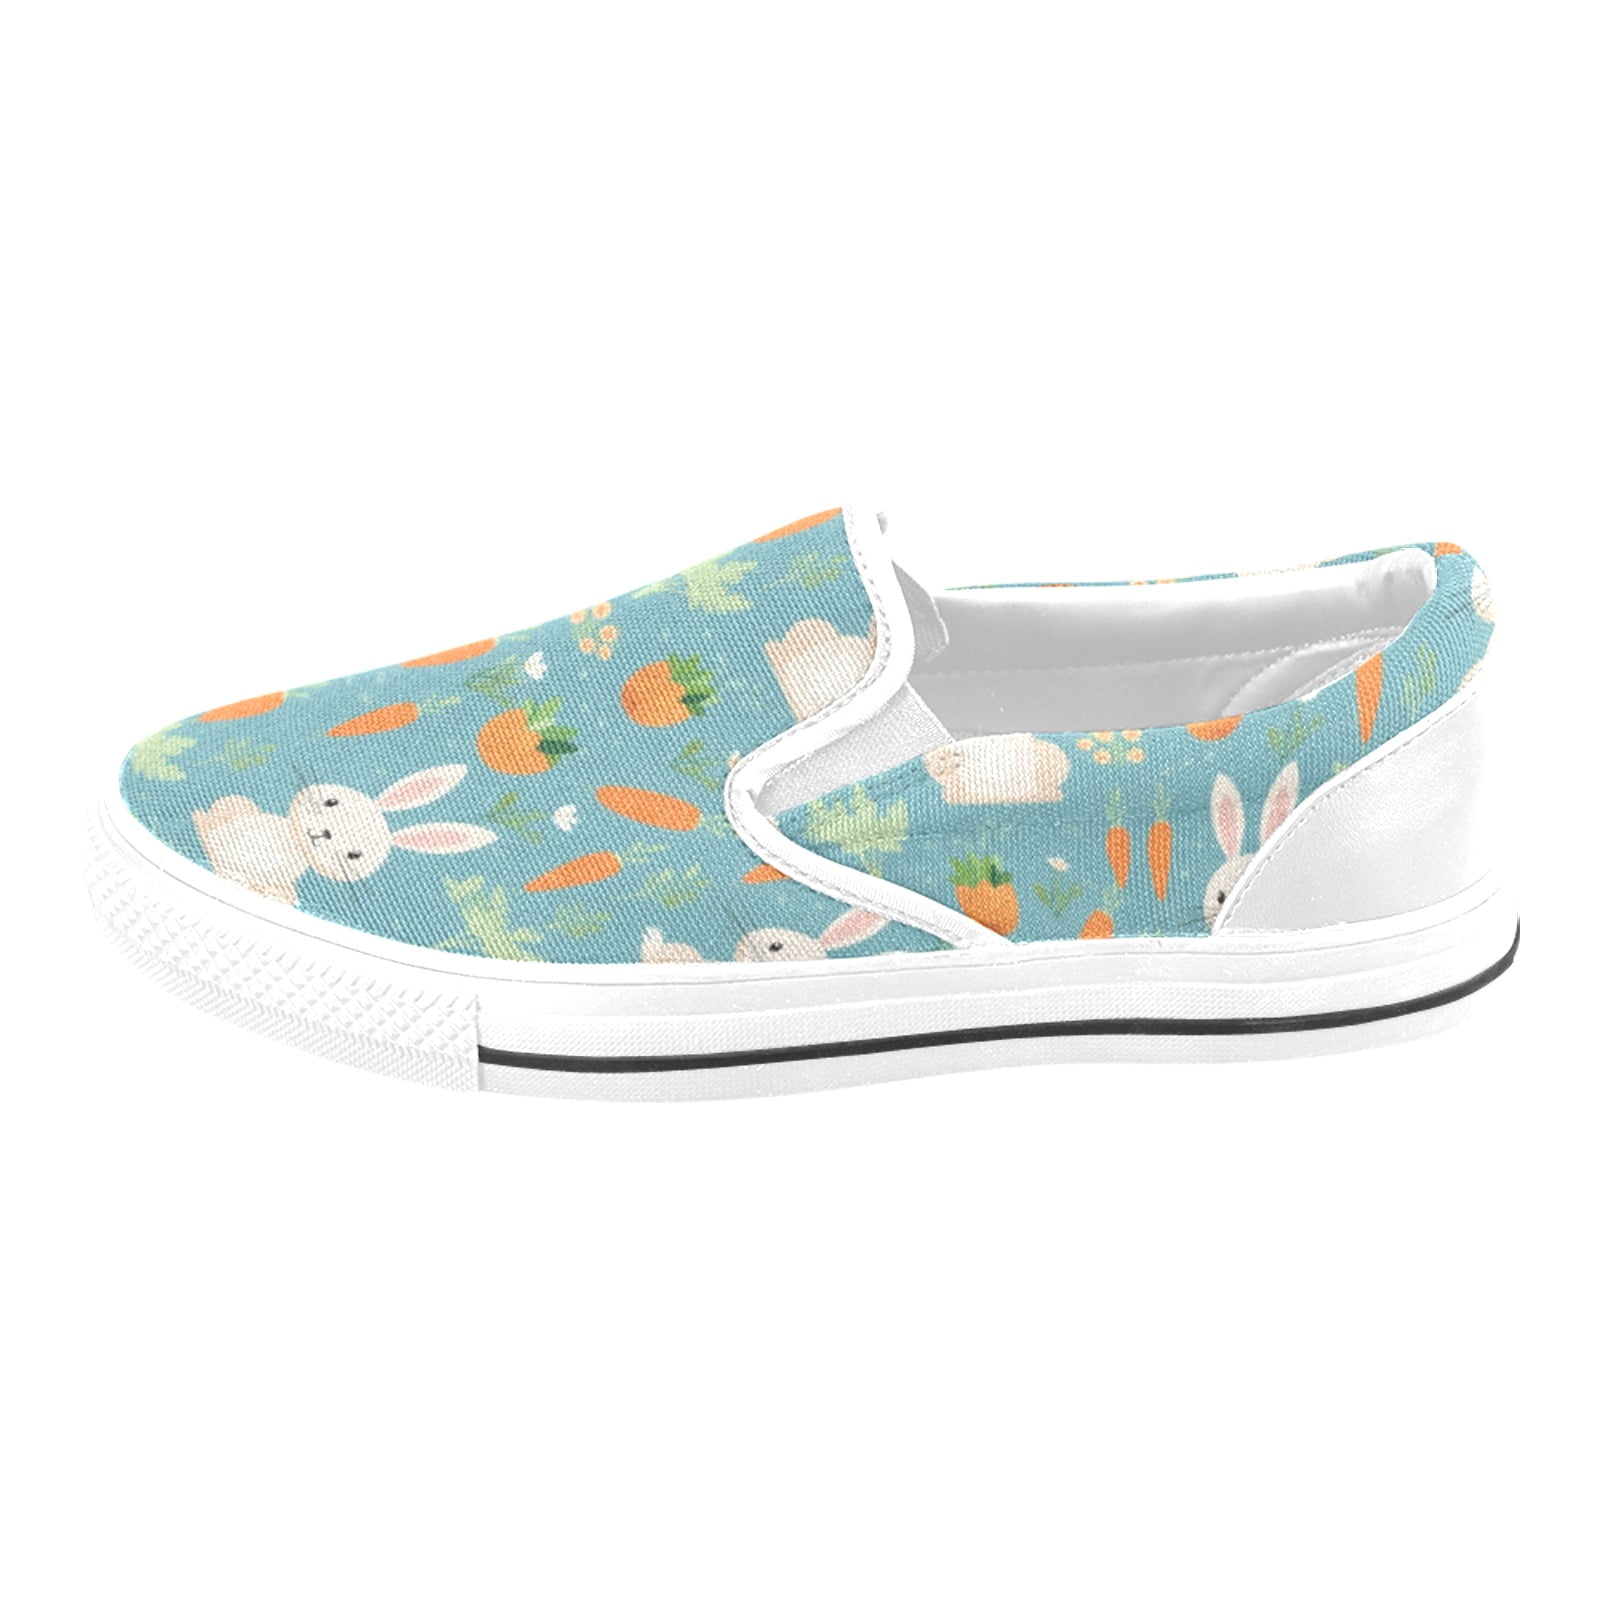 Mens Slip On Shoes Easter Bunny =4 Women's Fashion Art Casual Canvas ...